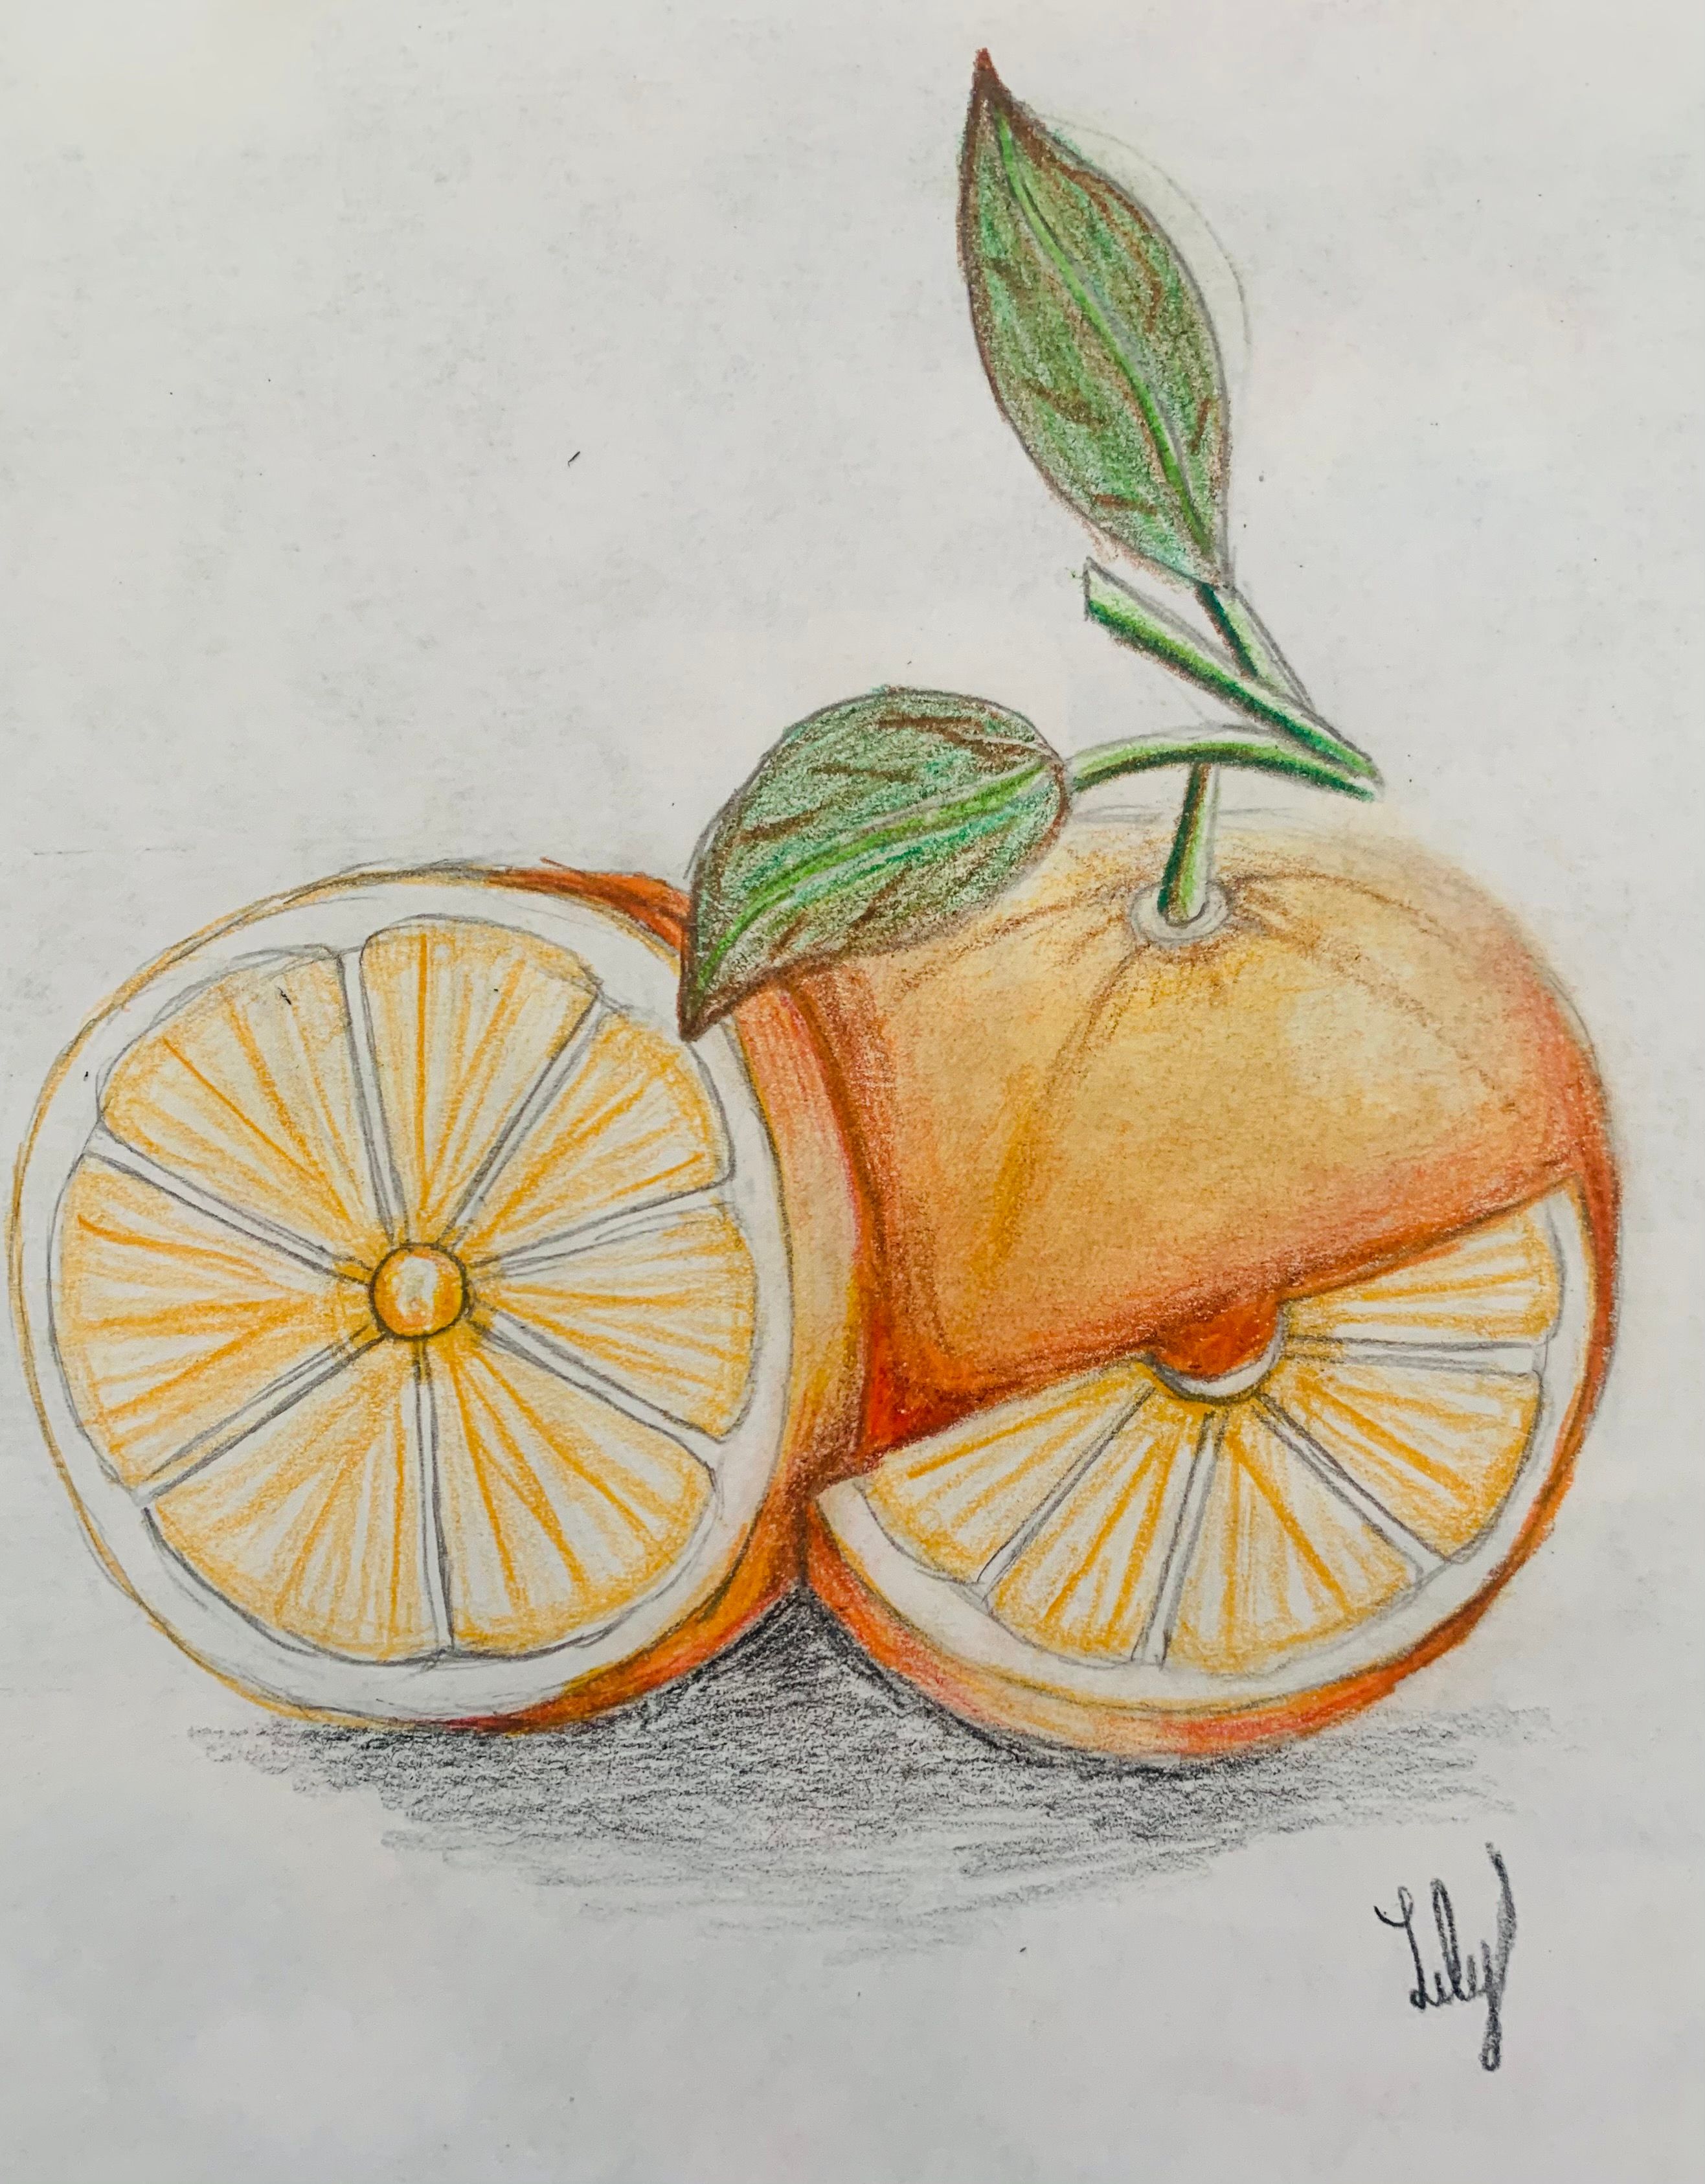 How to Draw and Shade Realistic Fruit Using Colored Pencils Small